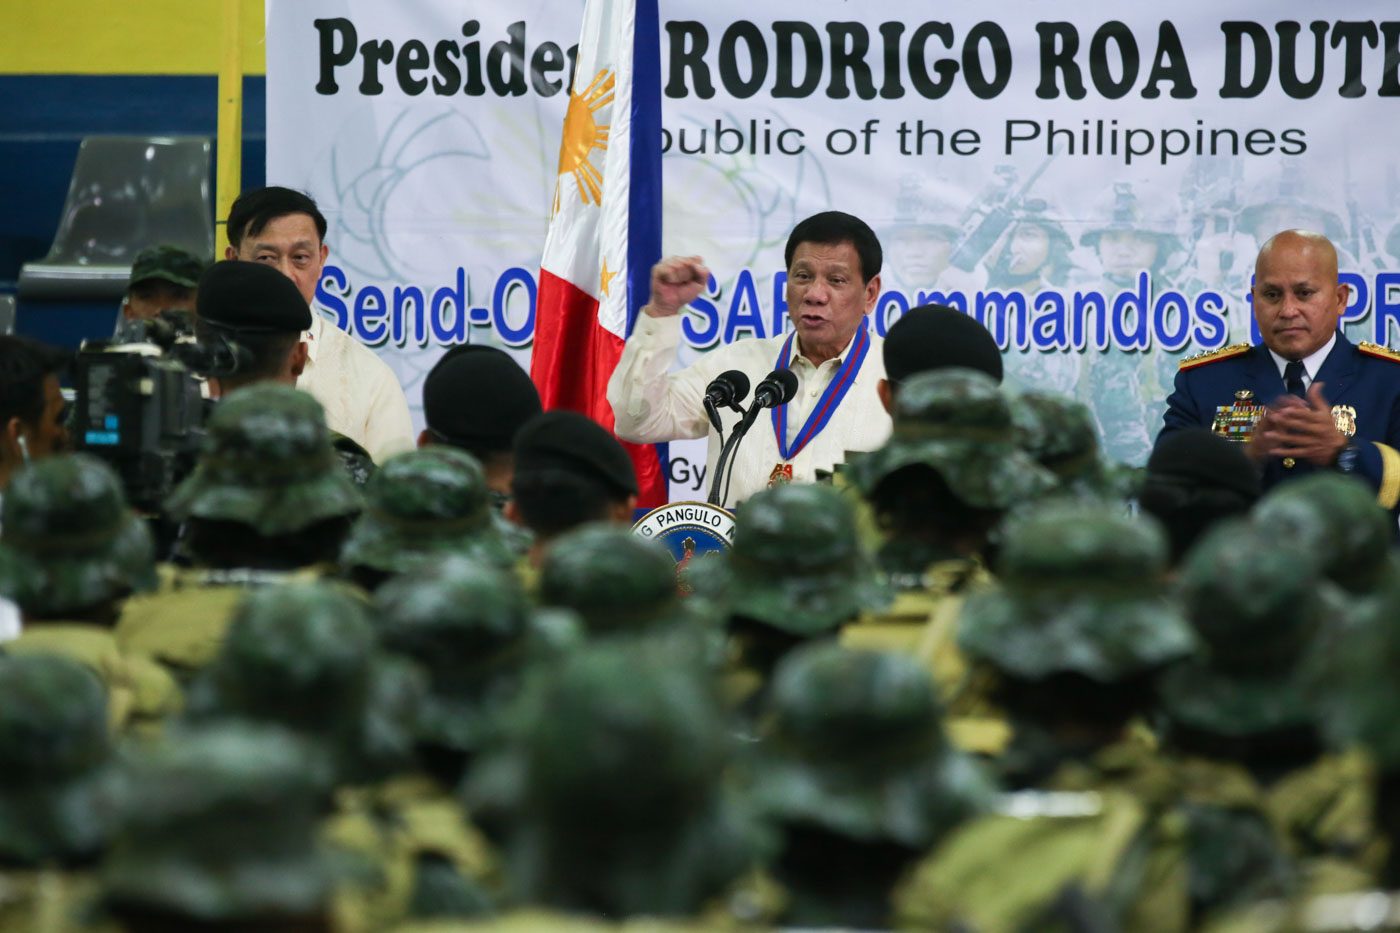 Duterte says 9,000 cops into drugs amid bloody drug war